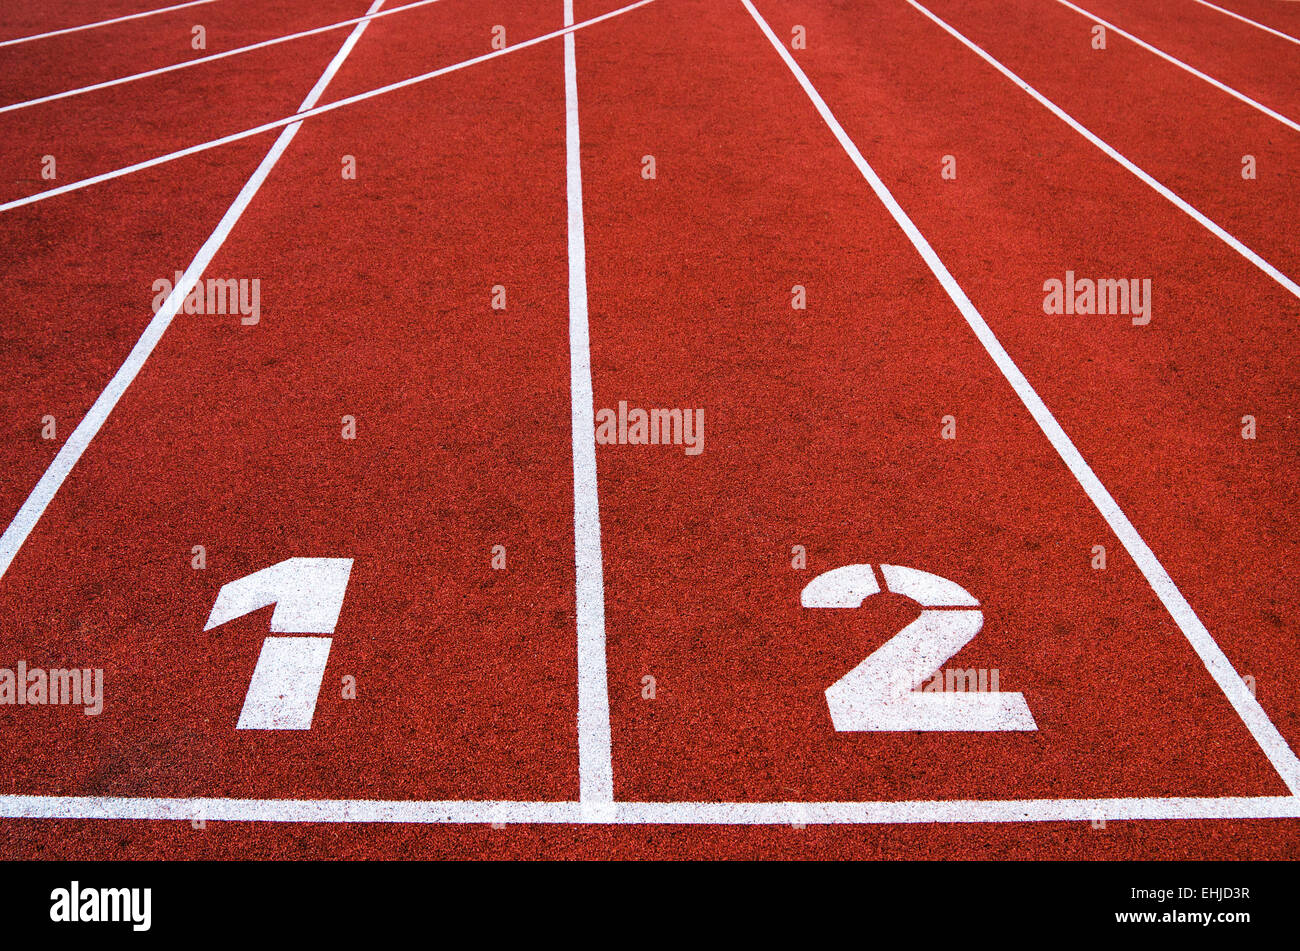 Racetrack in stadium, a close up Stock Photo